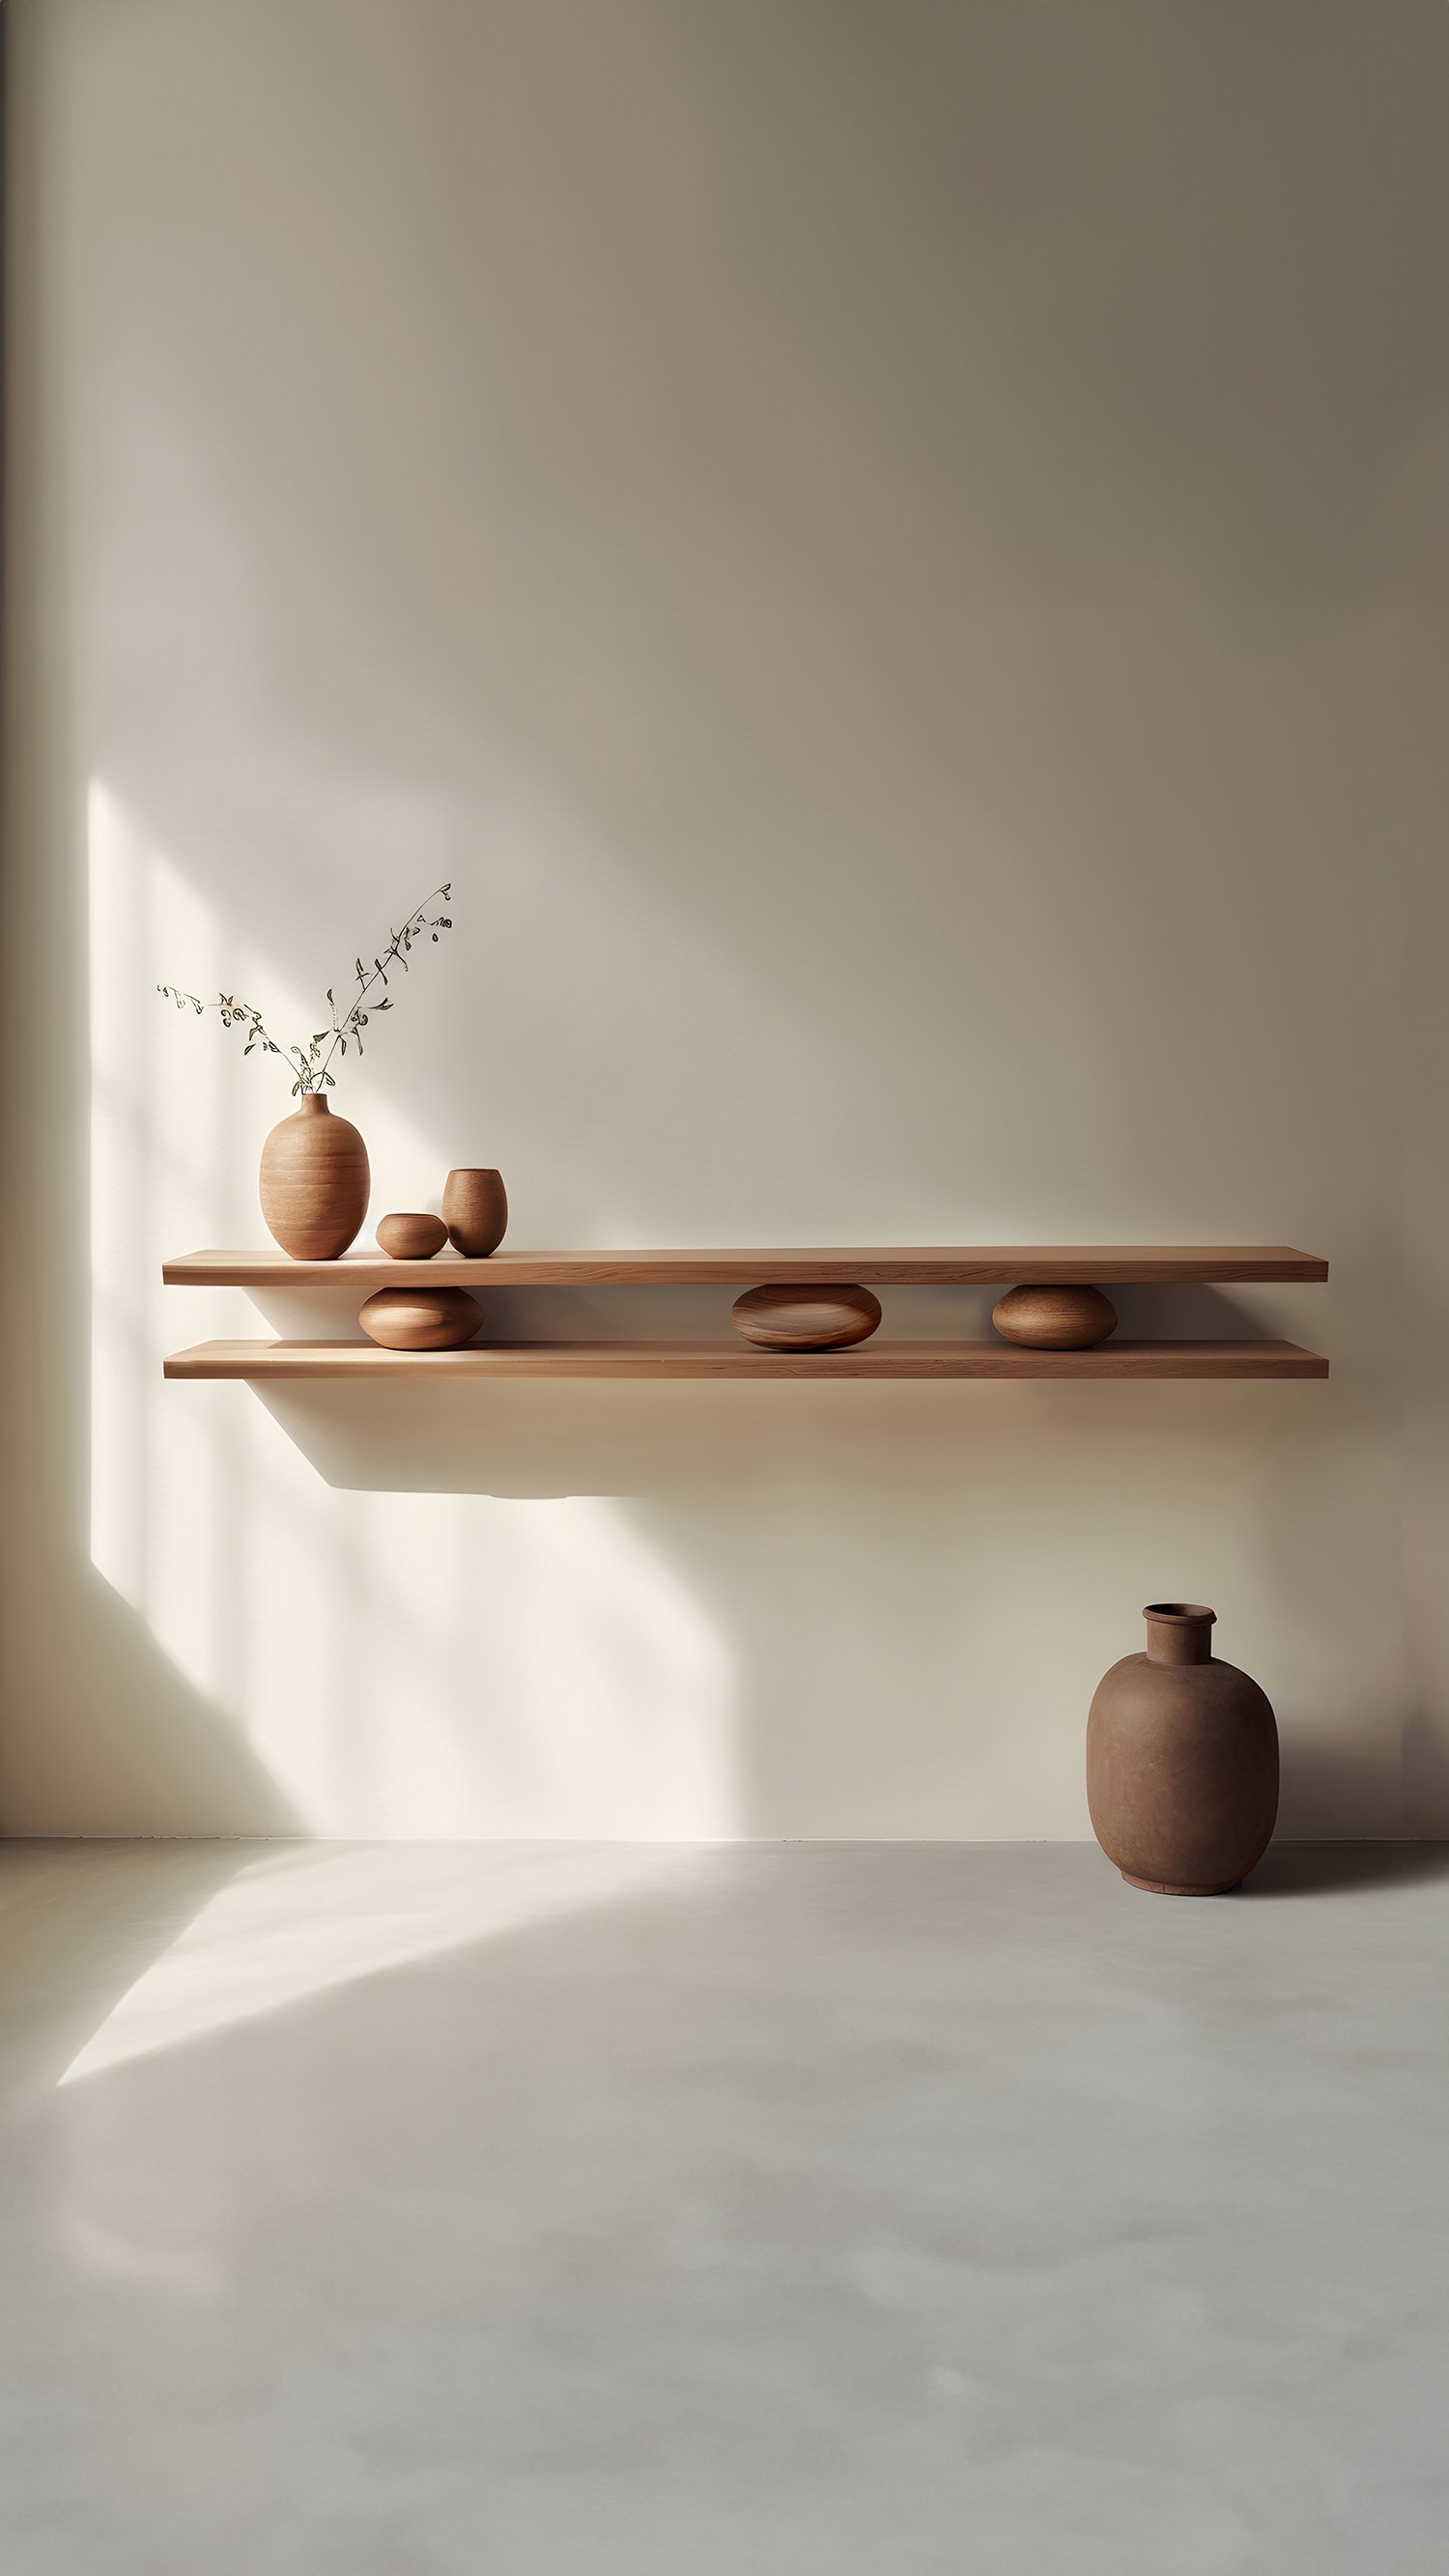 Set of Two Large Floating Shelves with Three Sculptural Wooden Pebble Accents in the Middle, Sereno by Joel Escalona — 4.jpg